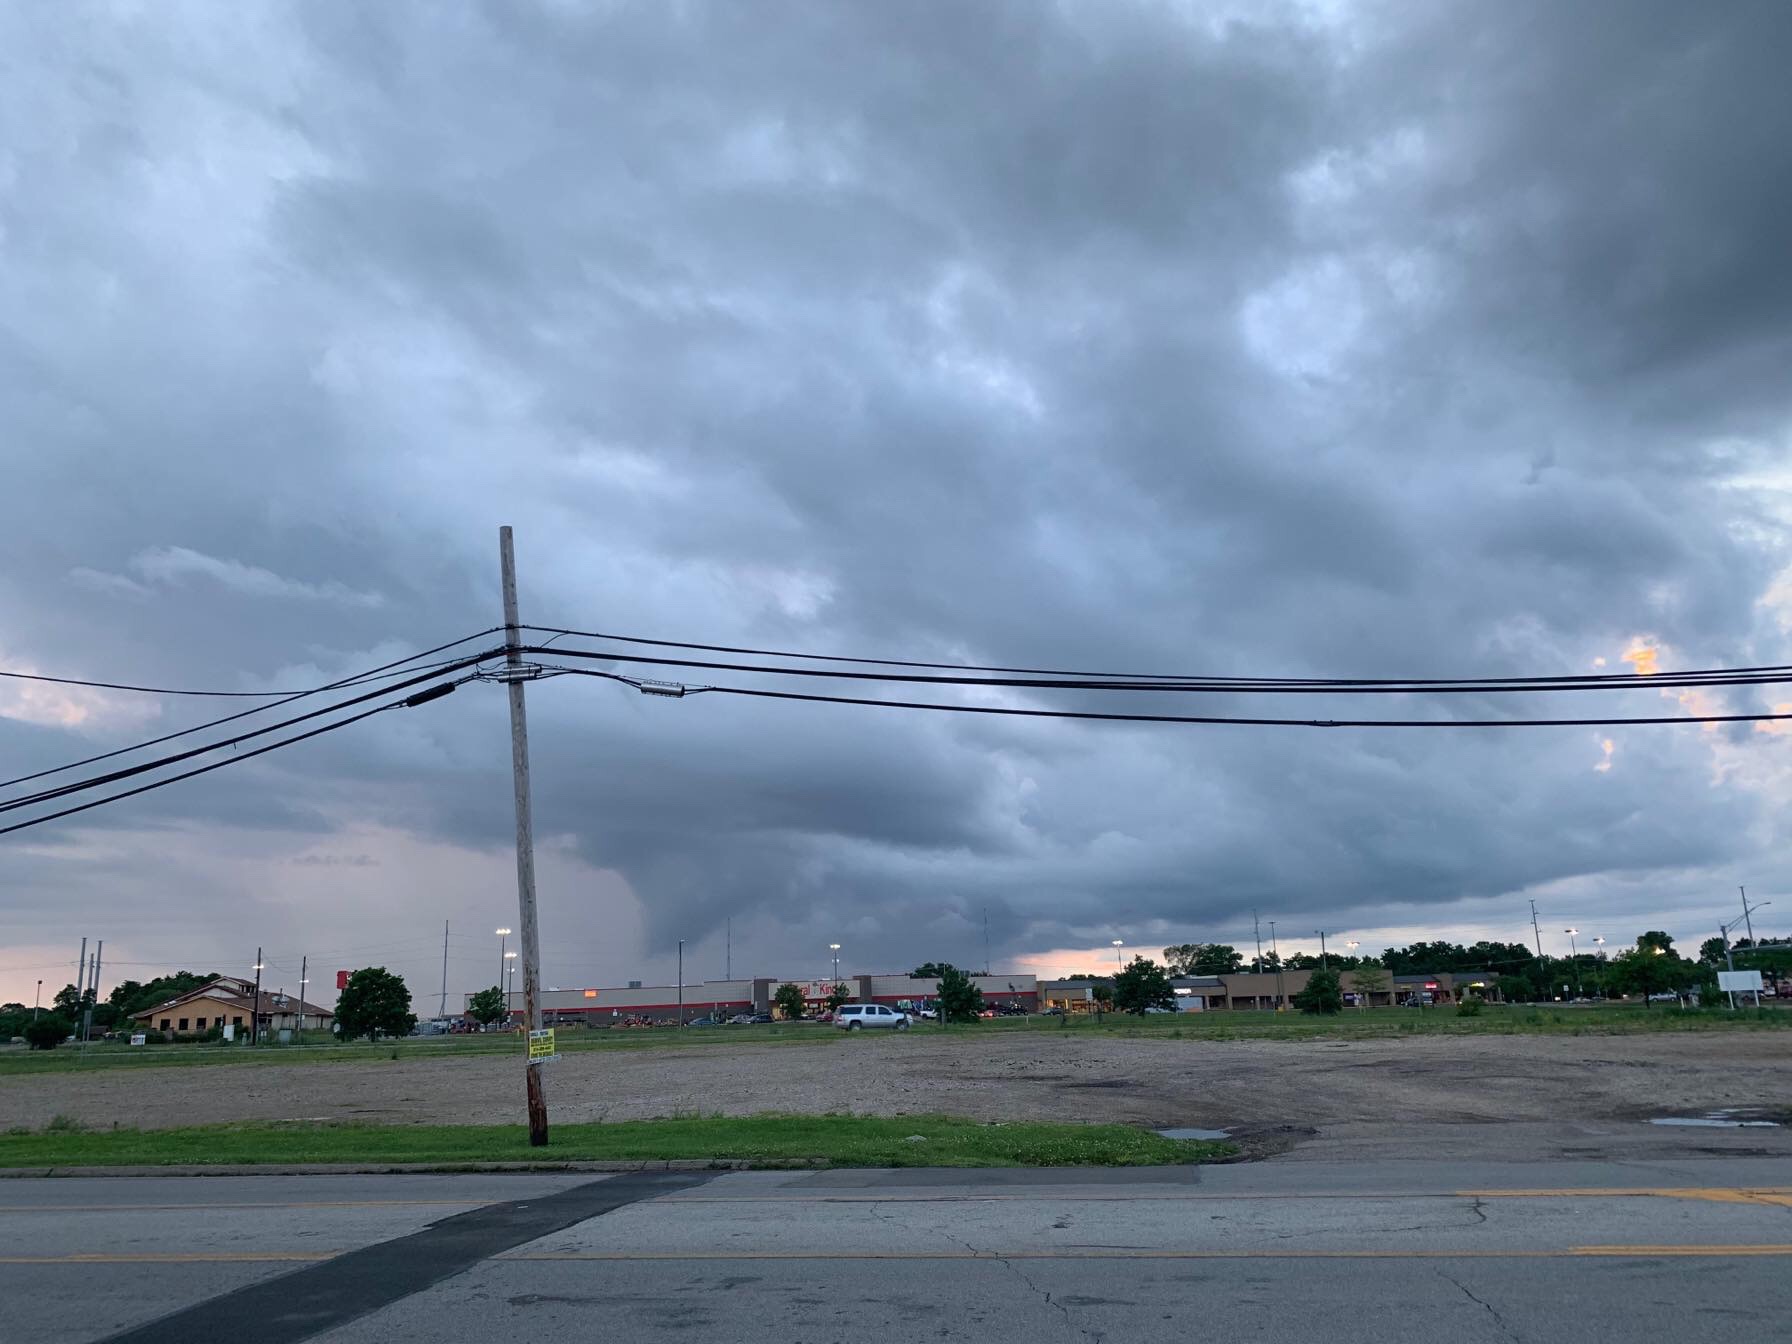 US National Weather Service Chicago Illinois - This tiny funnel cloud is  from eastern DeKalb County as of 7:15 pm. Brief funnels have been reported  elsewhere in the area too, and not